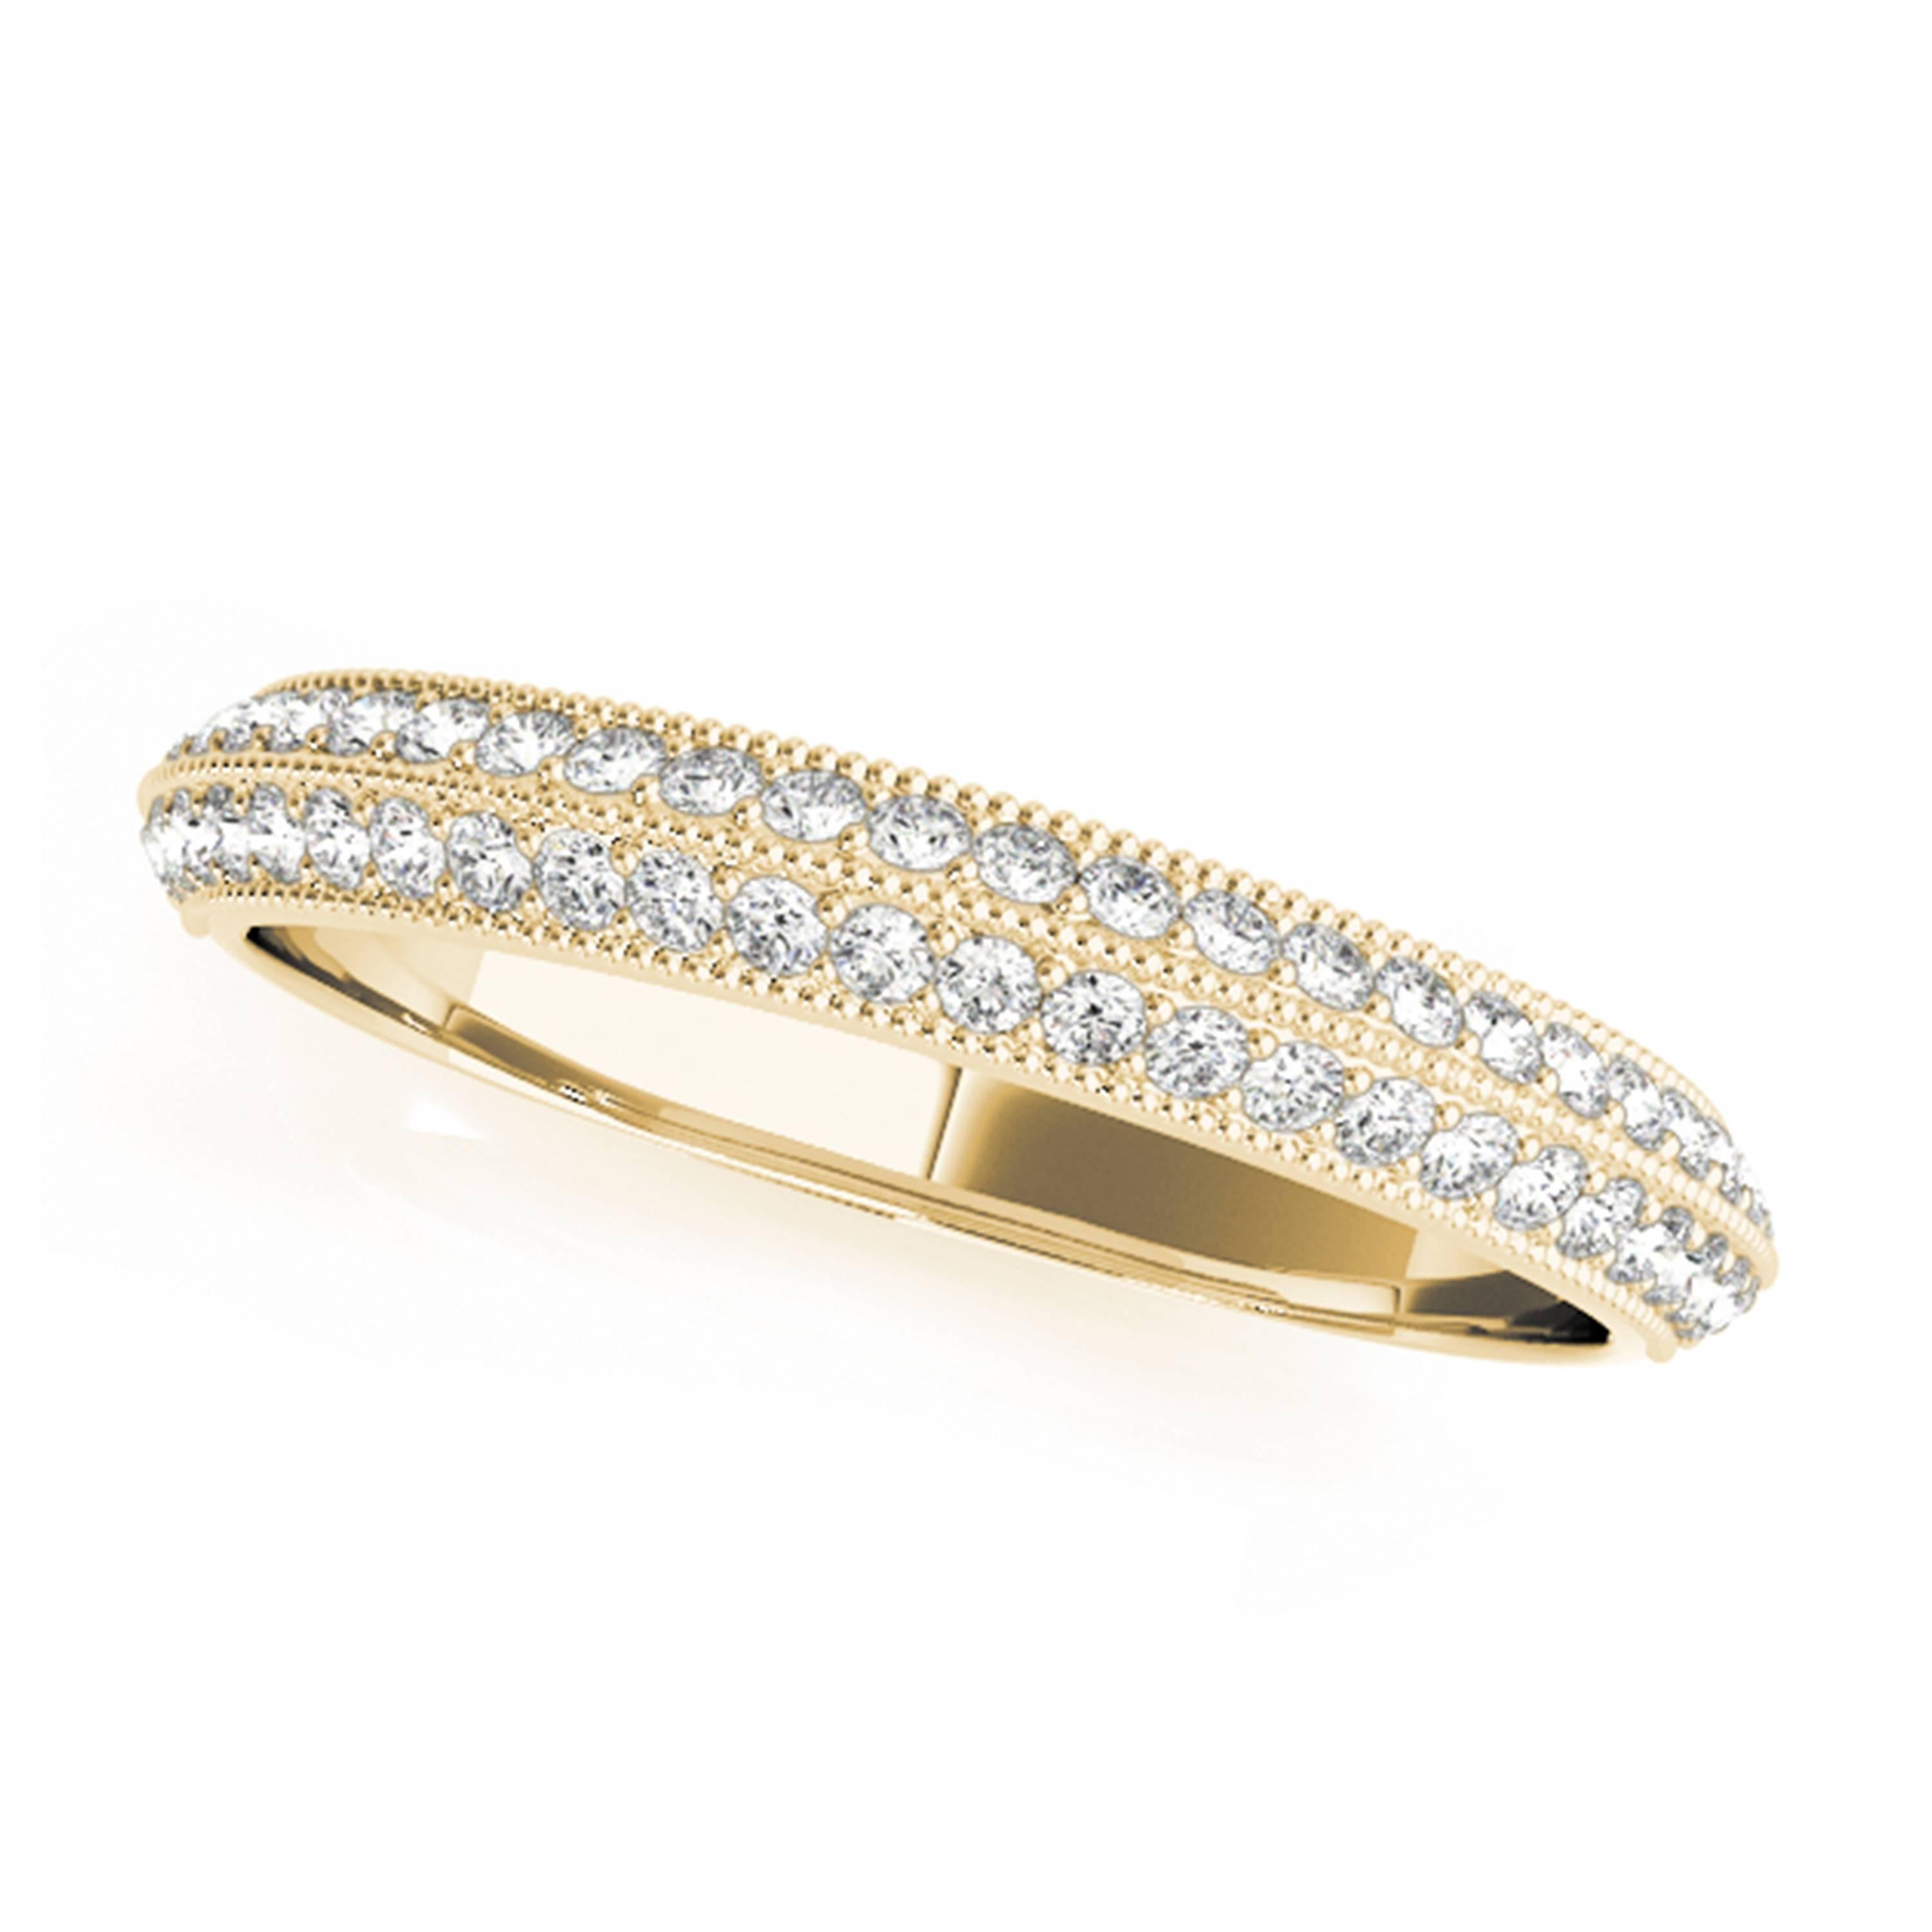 Material: 14k Yellow Gold 
Center Stone Details: 0.31 Carat White Diamonds Clarity: SI1-SI2 / Color: H-I

Ring Size: Size 7 (can be sized)
Fine one-of-a kind craftsmanship meets incredible quality in this breathtaking piece of jewelry.